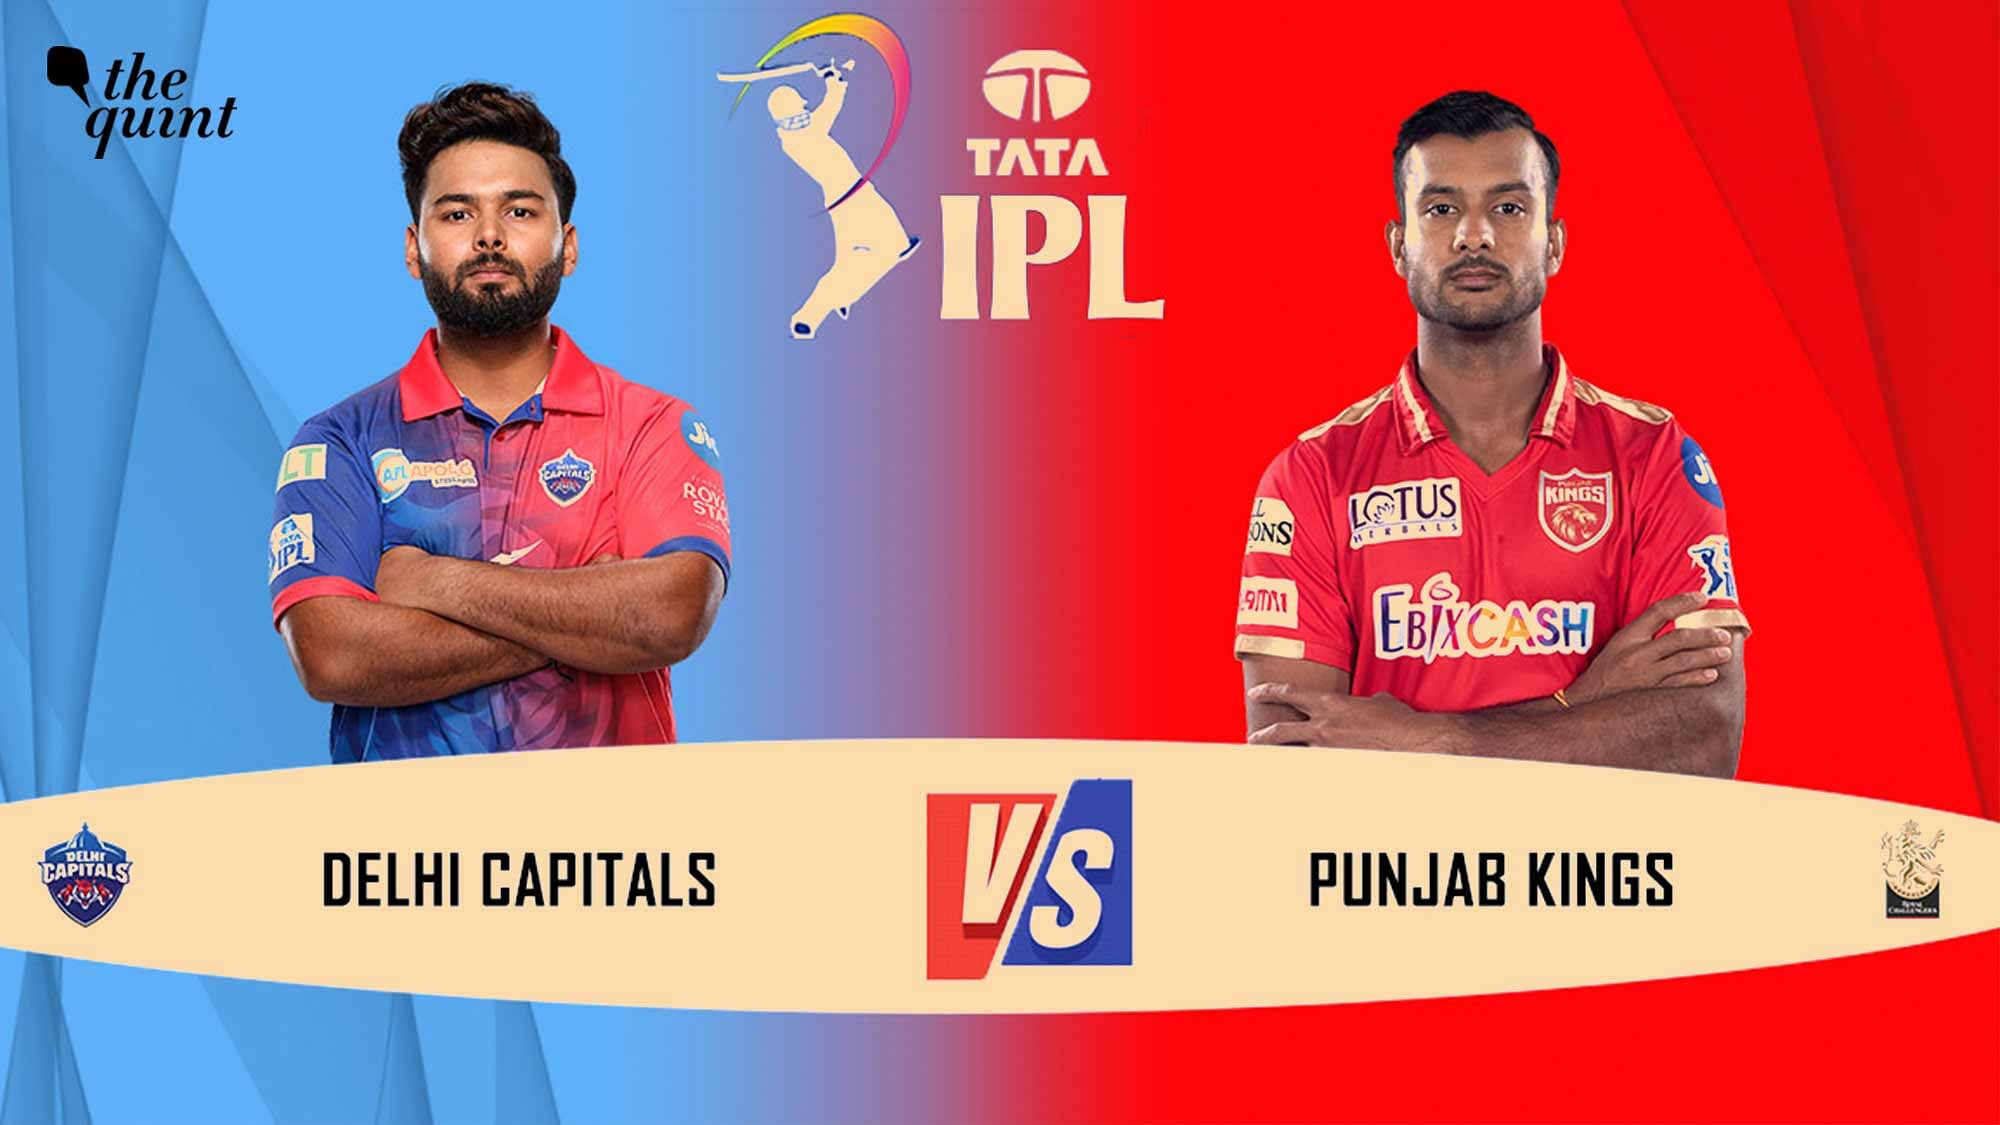 Delhi Capitals vs Punjab Kings Live Streaming Today When and Where To Watch DC vs PBKS Live Telecast on TV and Online